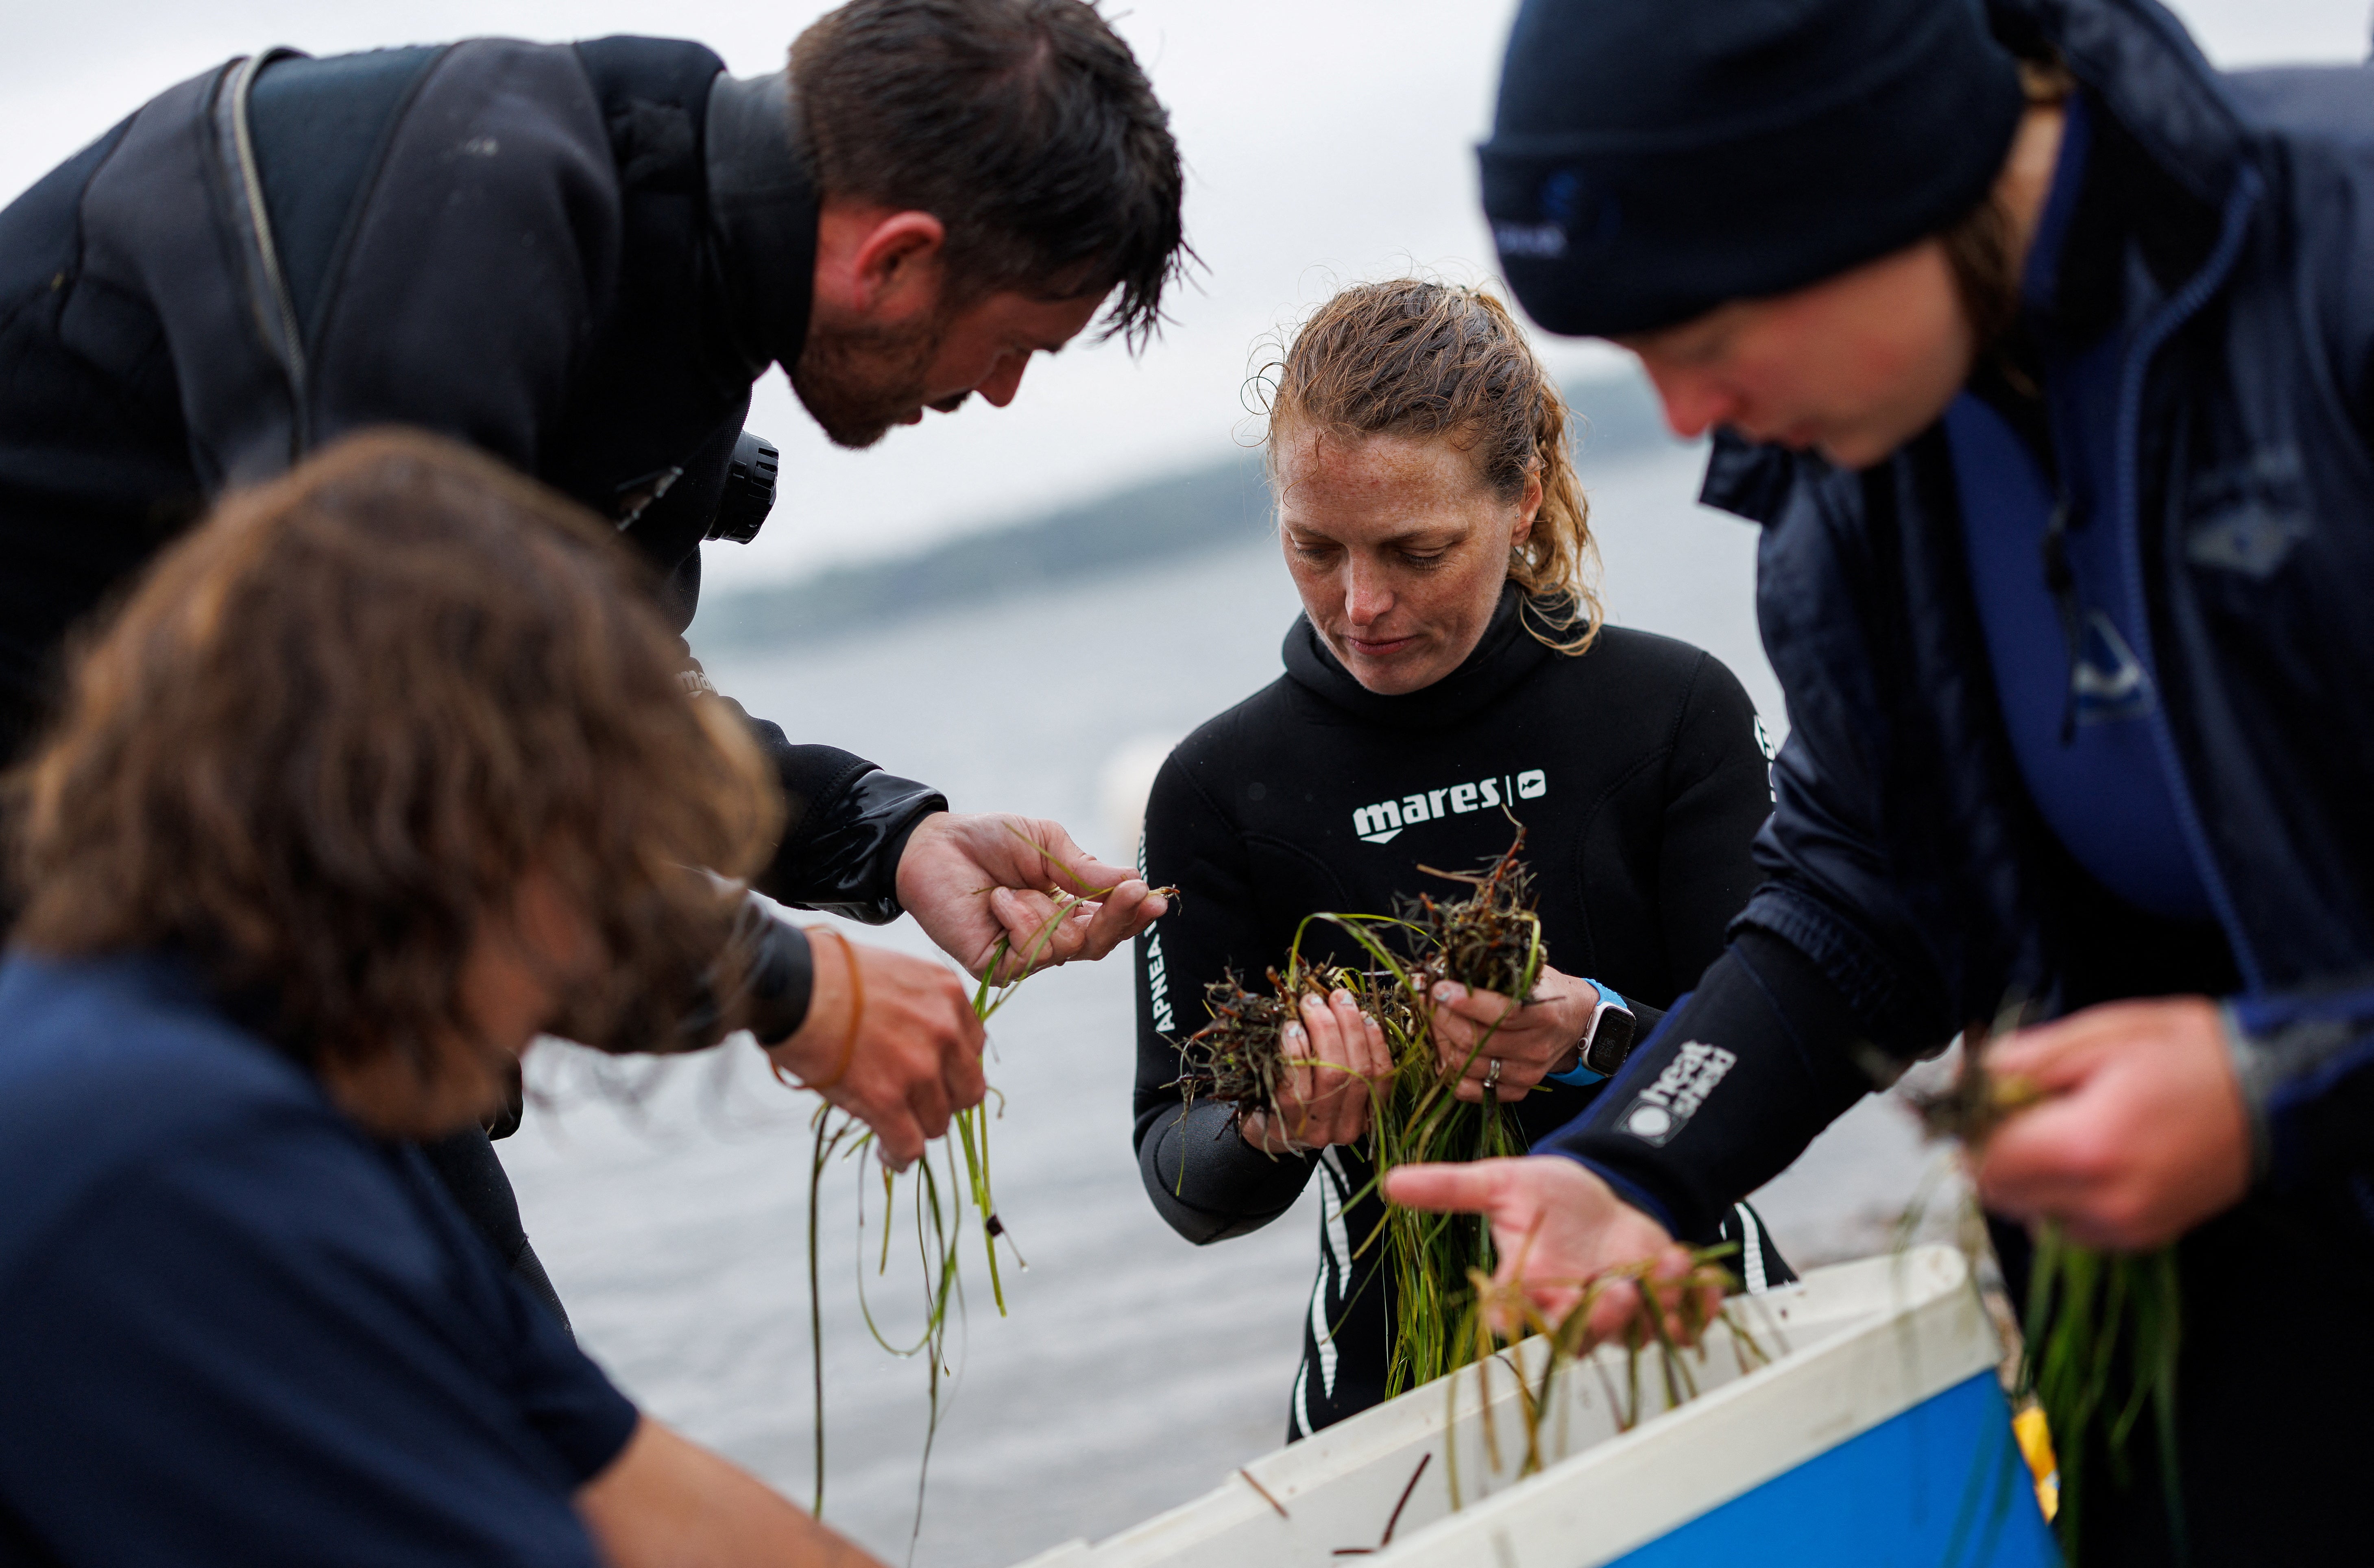 Flo Stadler, 36, an IT engineer and campaign leader of the maritime conservation group Sea Shepherd, and Angela Stevenson, 39, a marine scientist for Geomar, bundle and store harvested seagrass shoots from a donor meadow, near Kiel, Germany 1 July